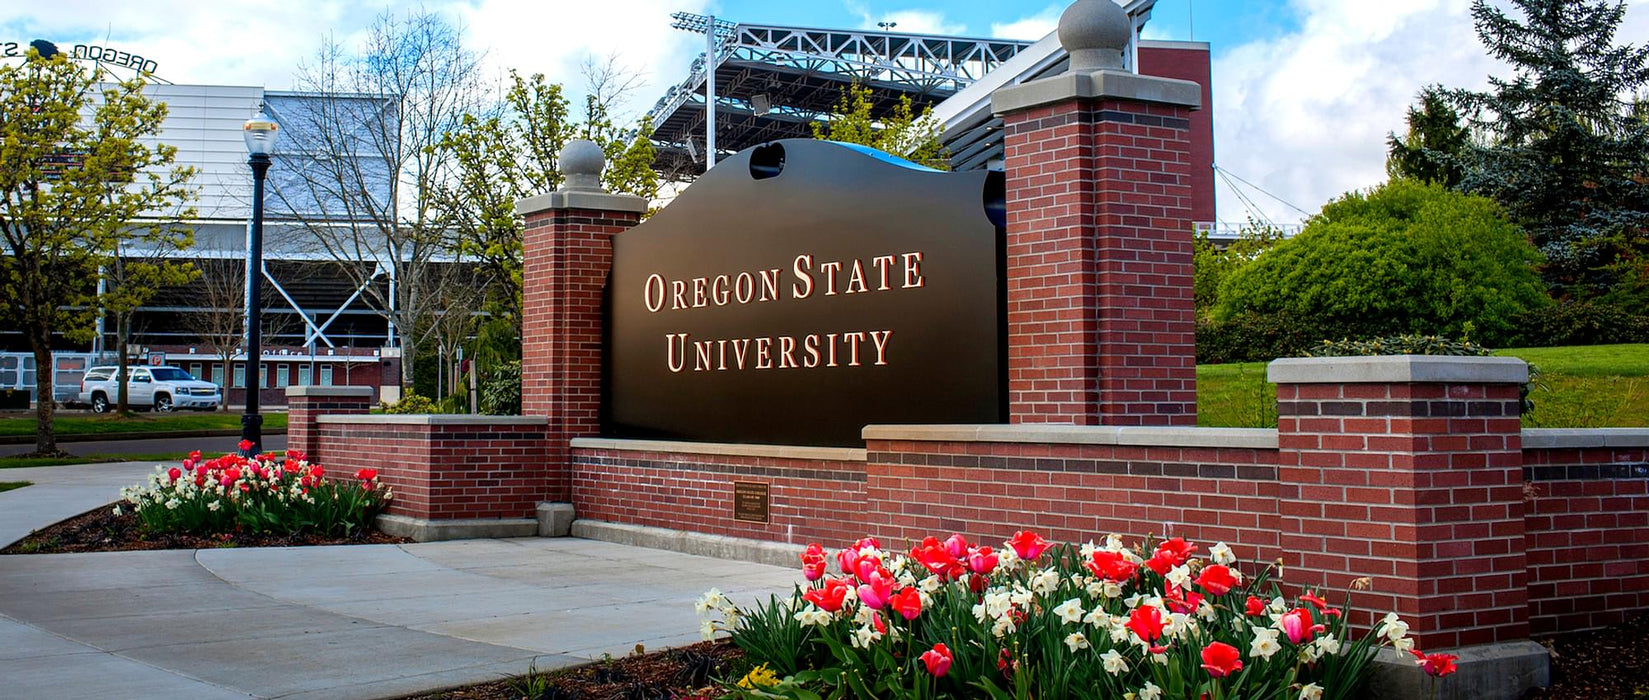 Master of Engineering - Computer Science at Oregon State University - Corvallis: Tuition: $29,700.00 USD/year (Scholarship Available)